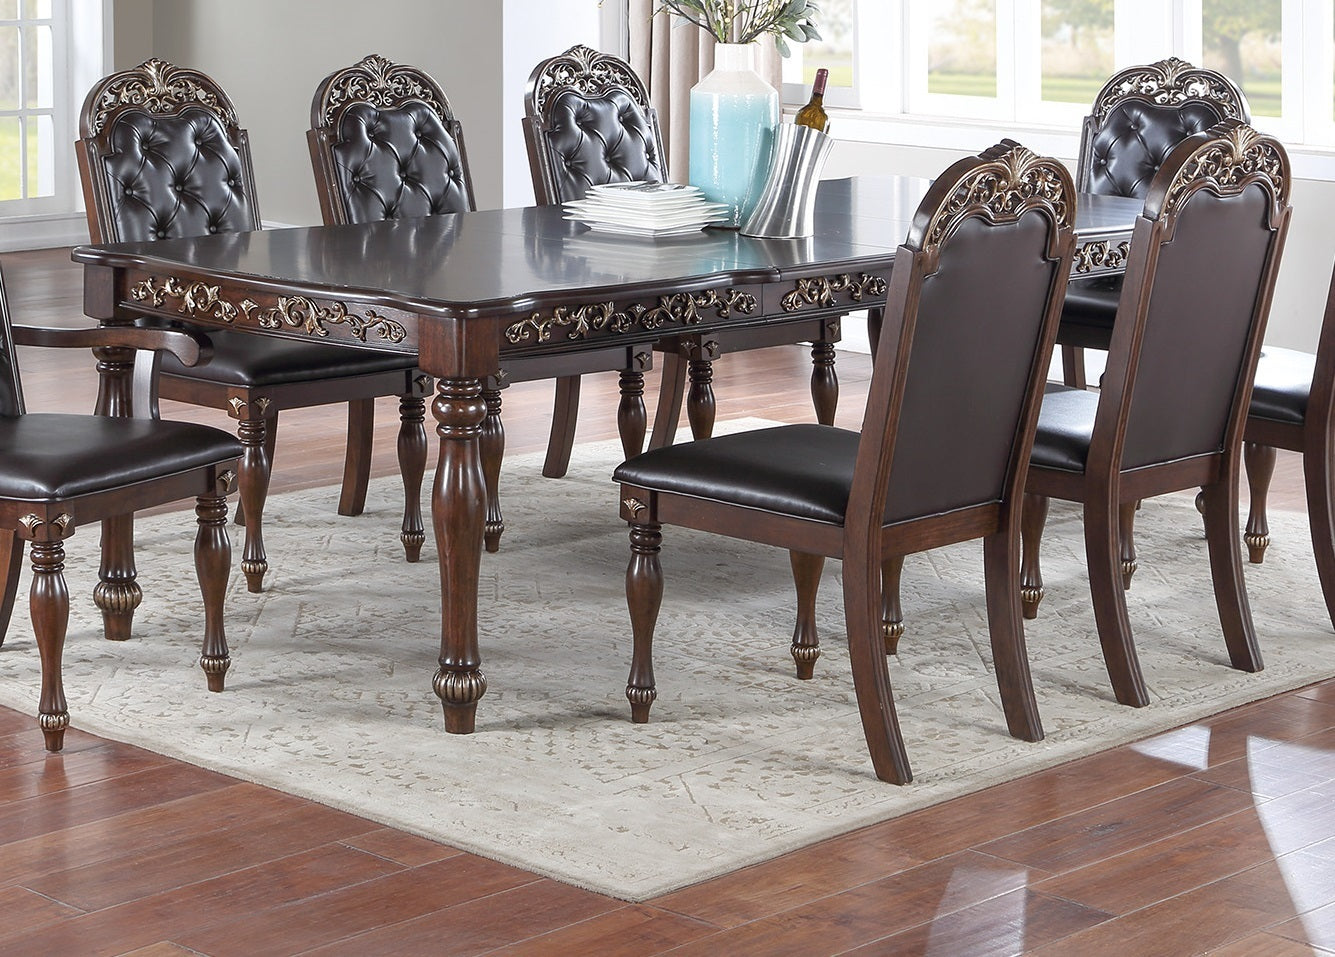 Online Furniture Store. Chairs, Tables, Refrigerator,  Tables & More. Raee-Industries.